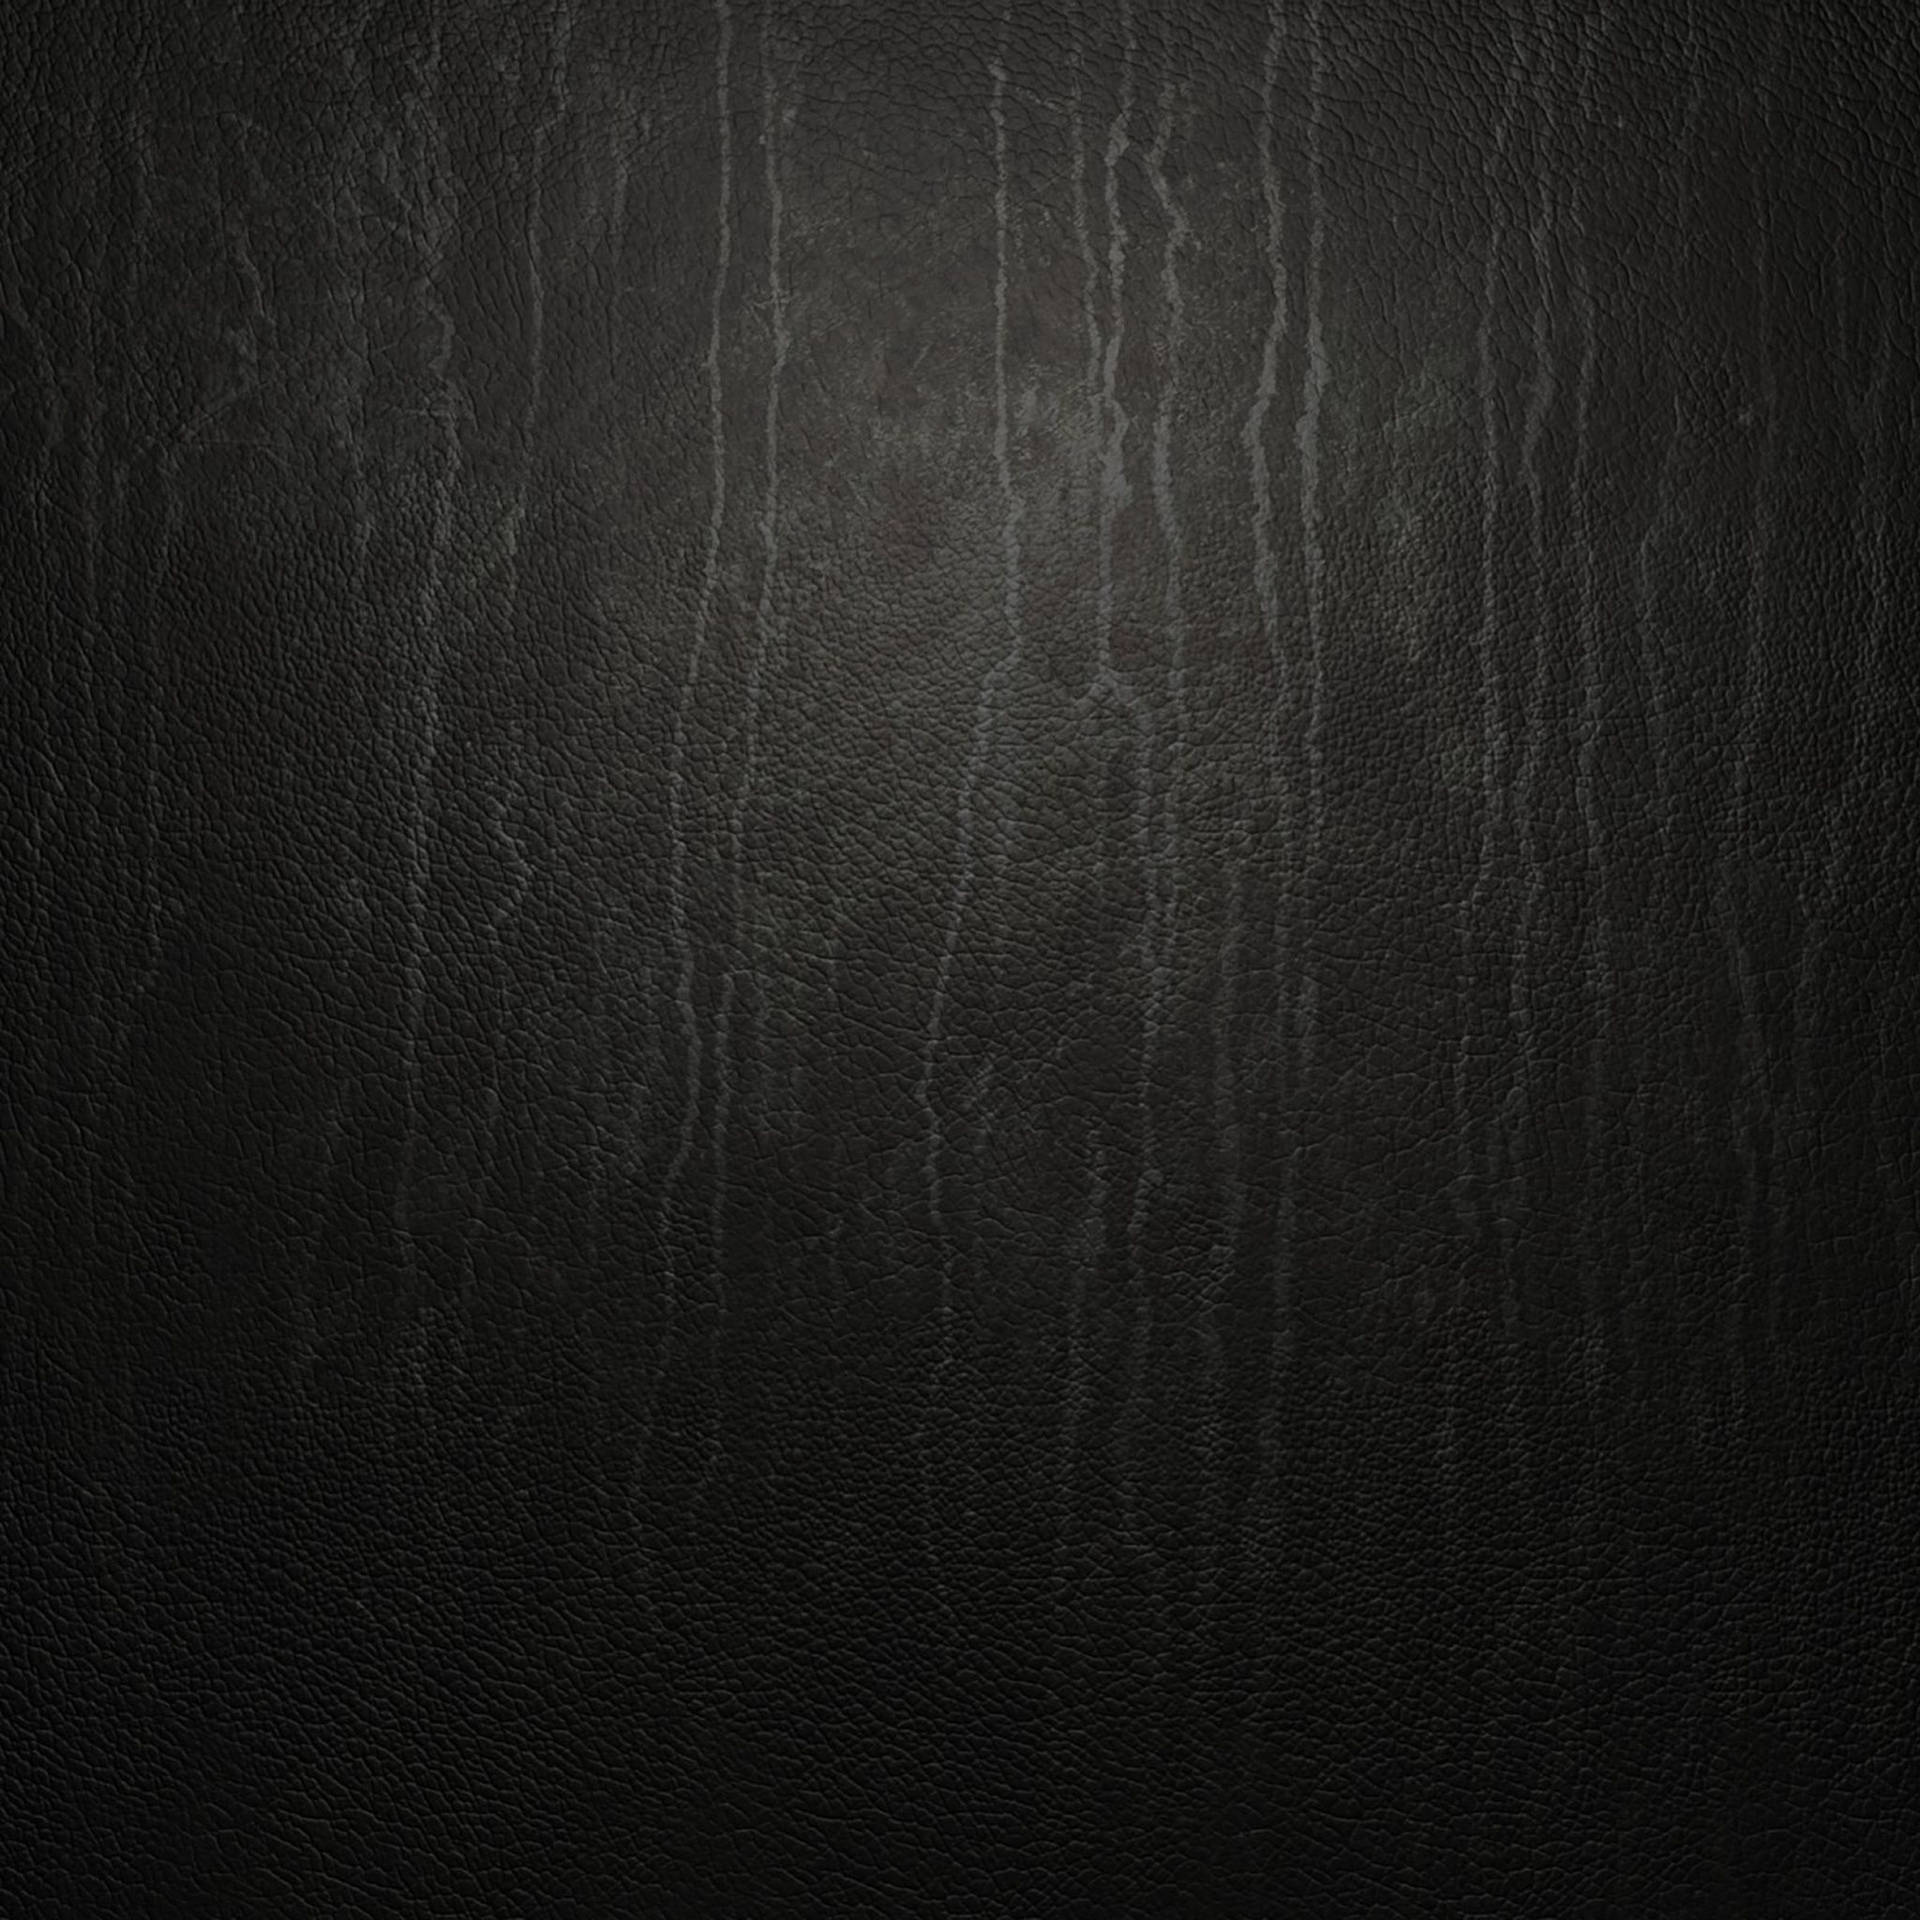 White Drips On Black Leather iPhone Wallpaper